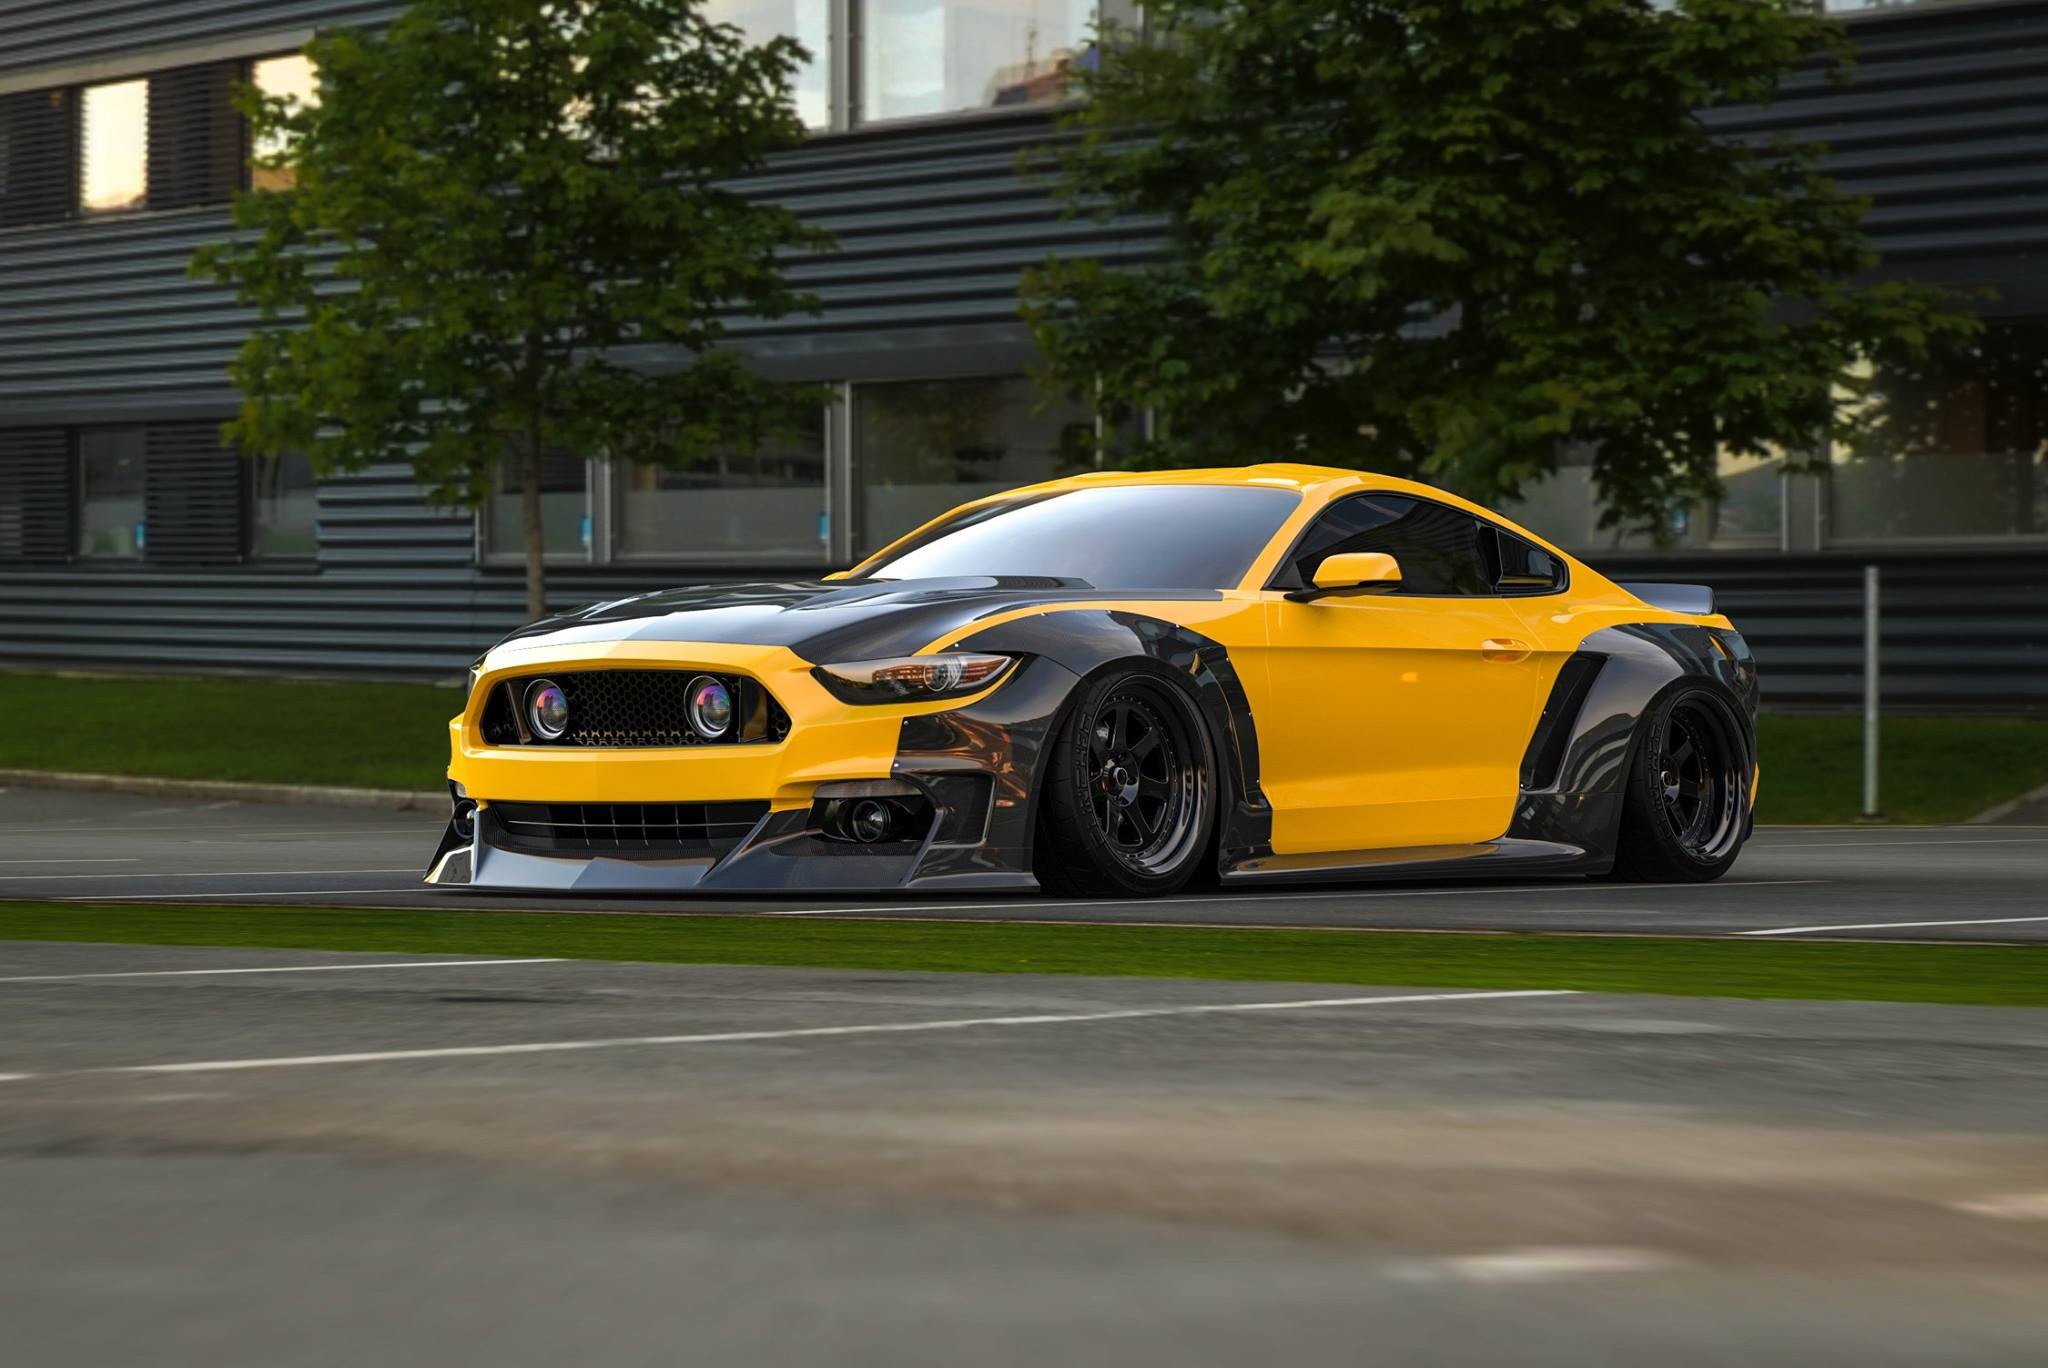 Wide Black Fender Flares on Yellow Ford Mustang - Photo by Clinched